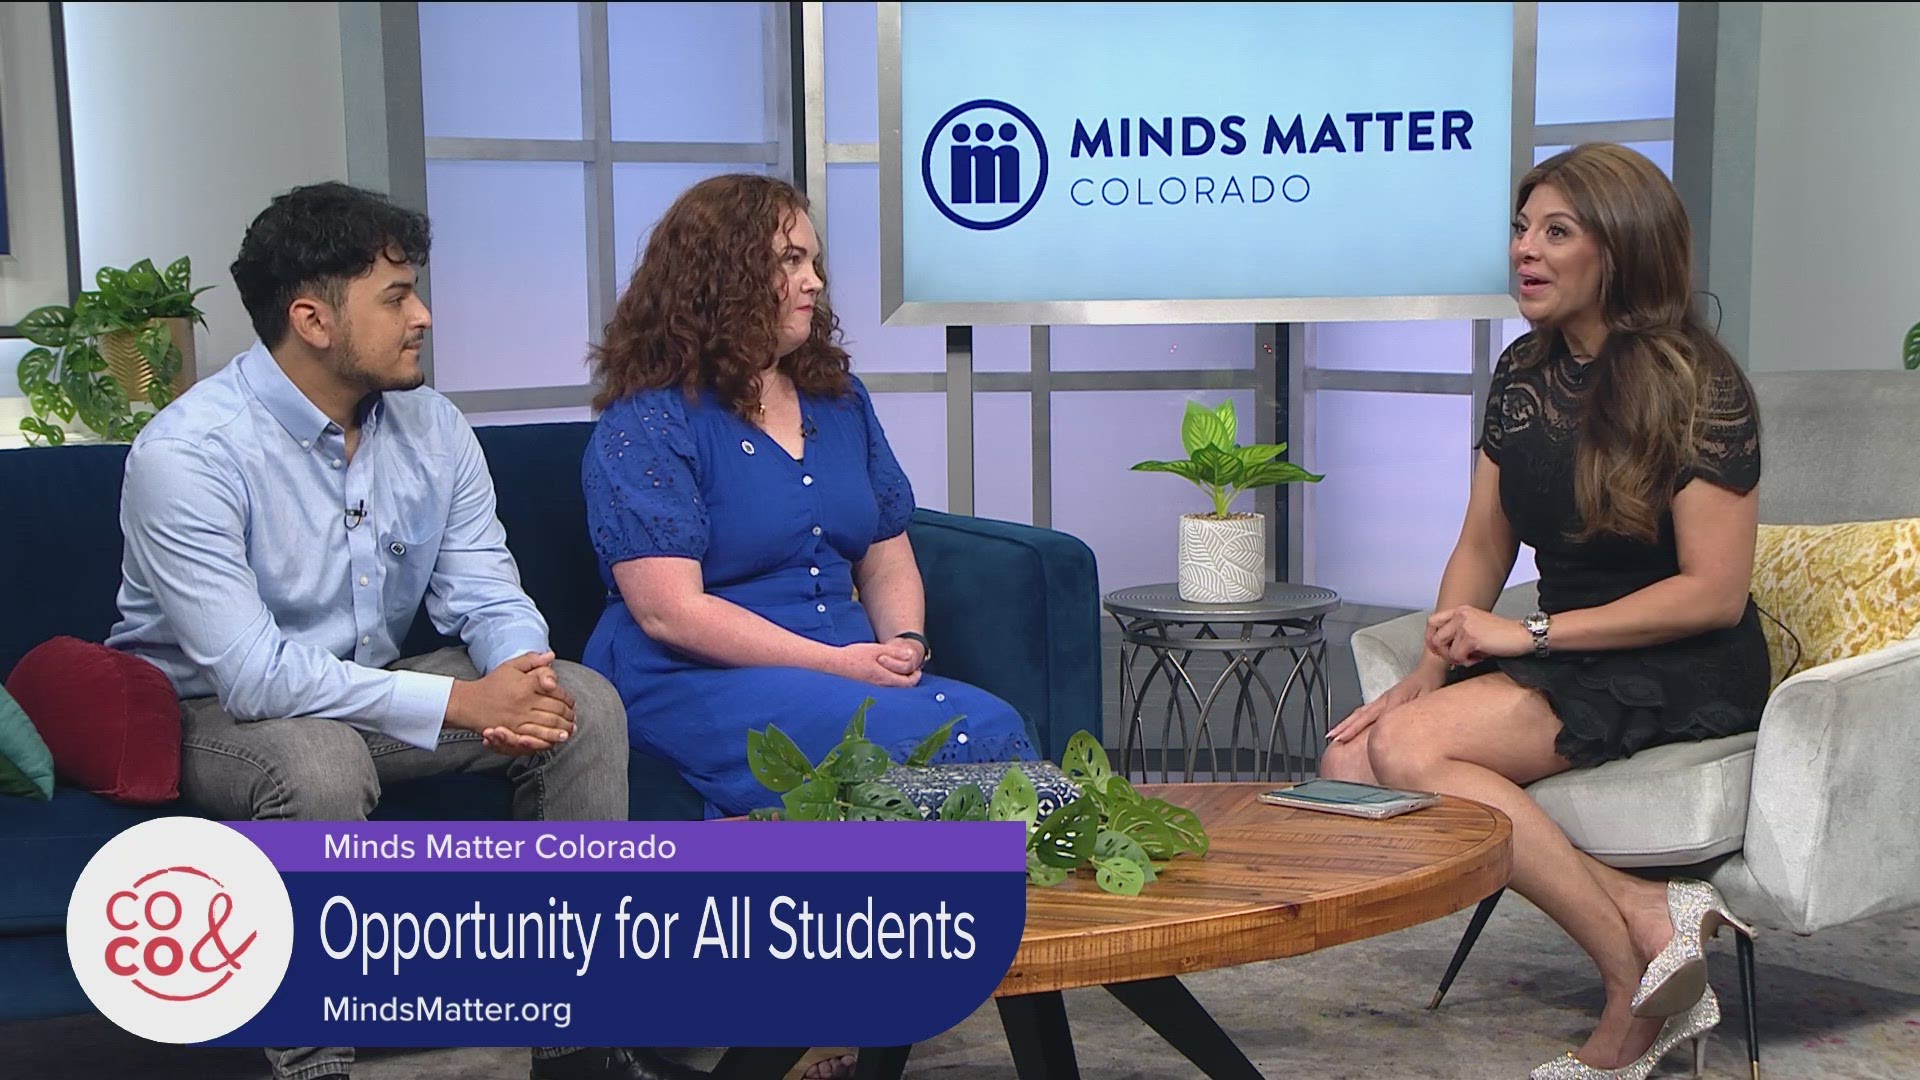 To become a mentor, enroll a student or learn more about the incredible work being done by Minds Matter, check out their website MindsMatter.org.